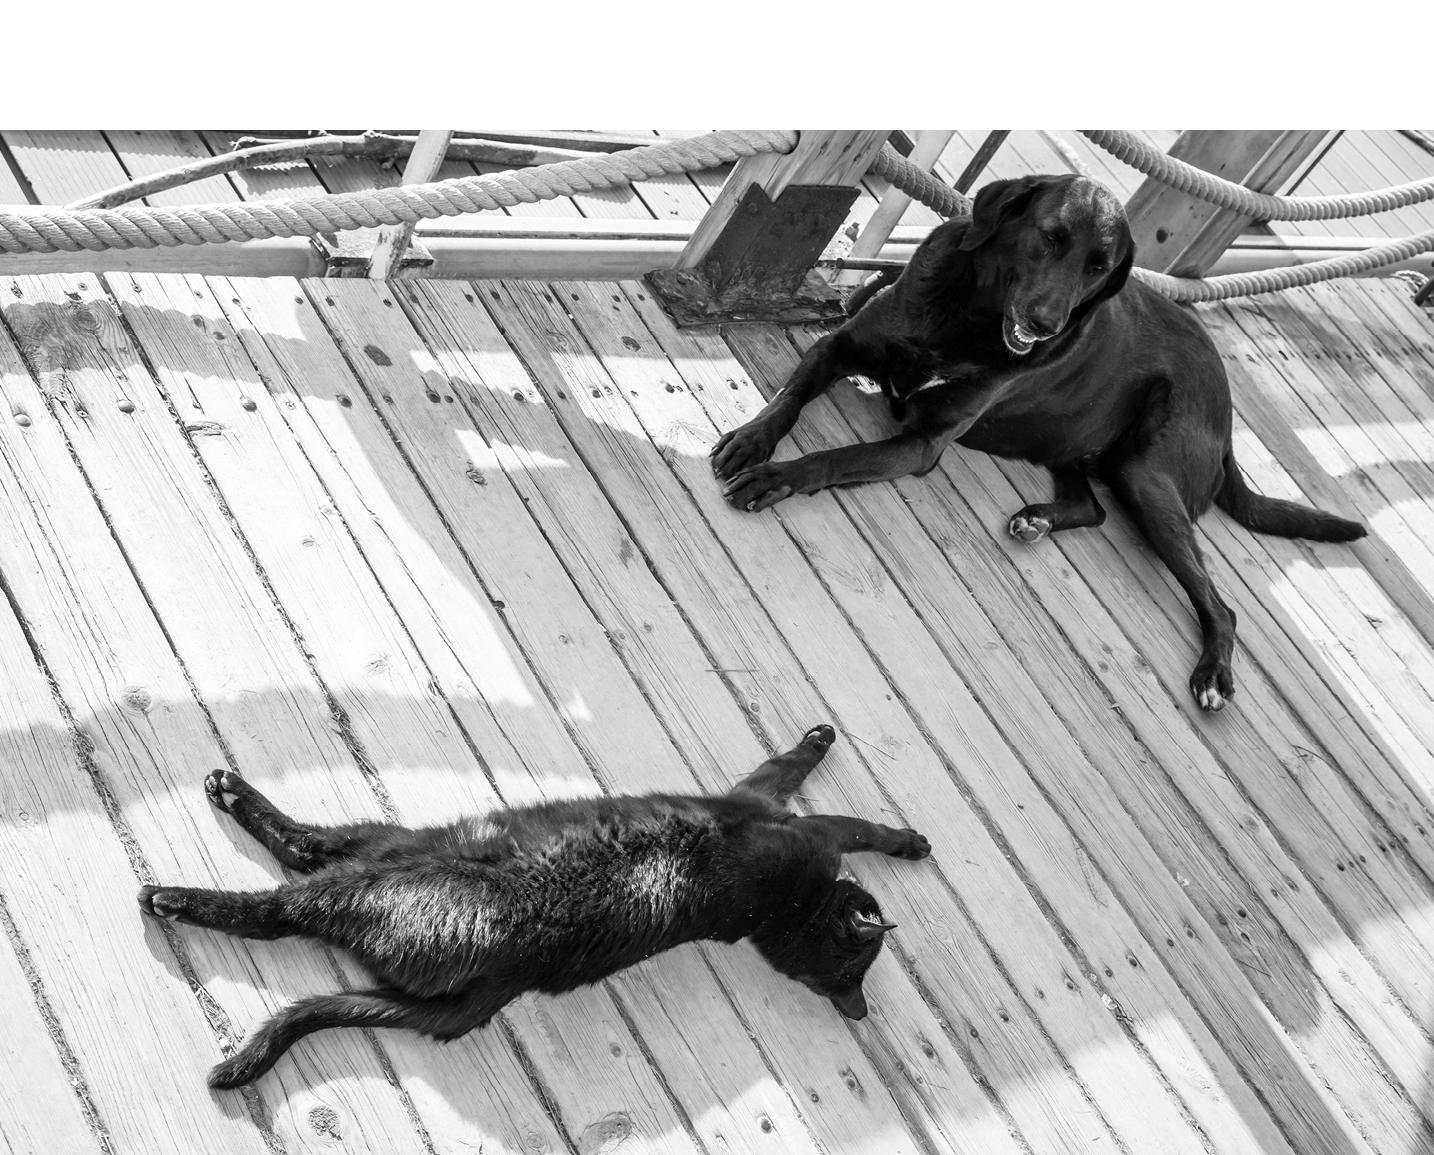 Black homeless cat and dog rest in the shadow on wooden floor